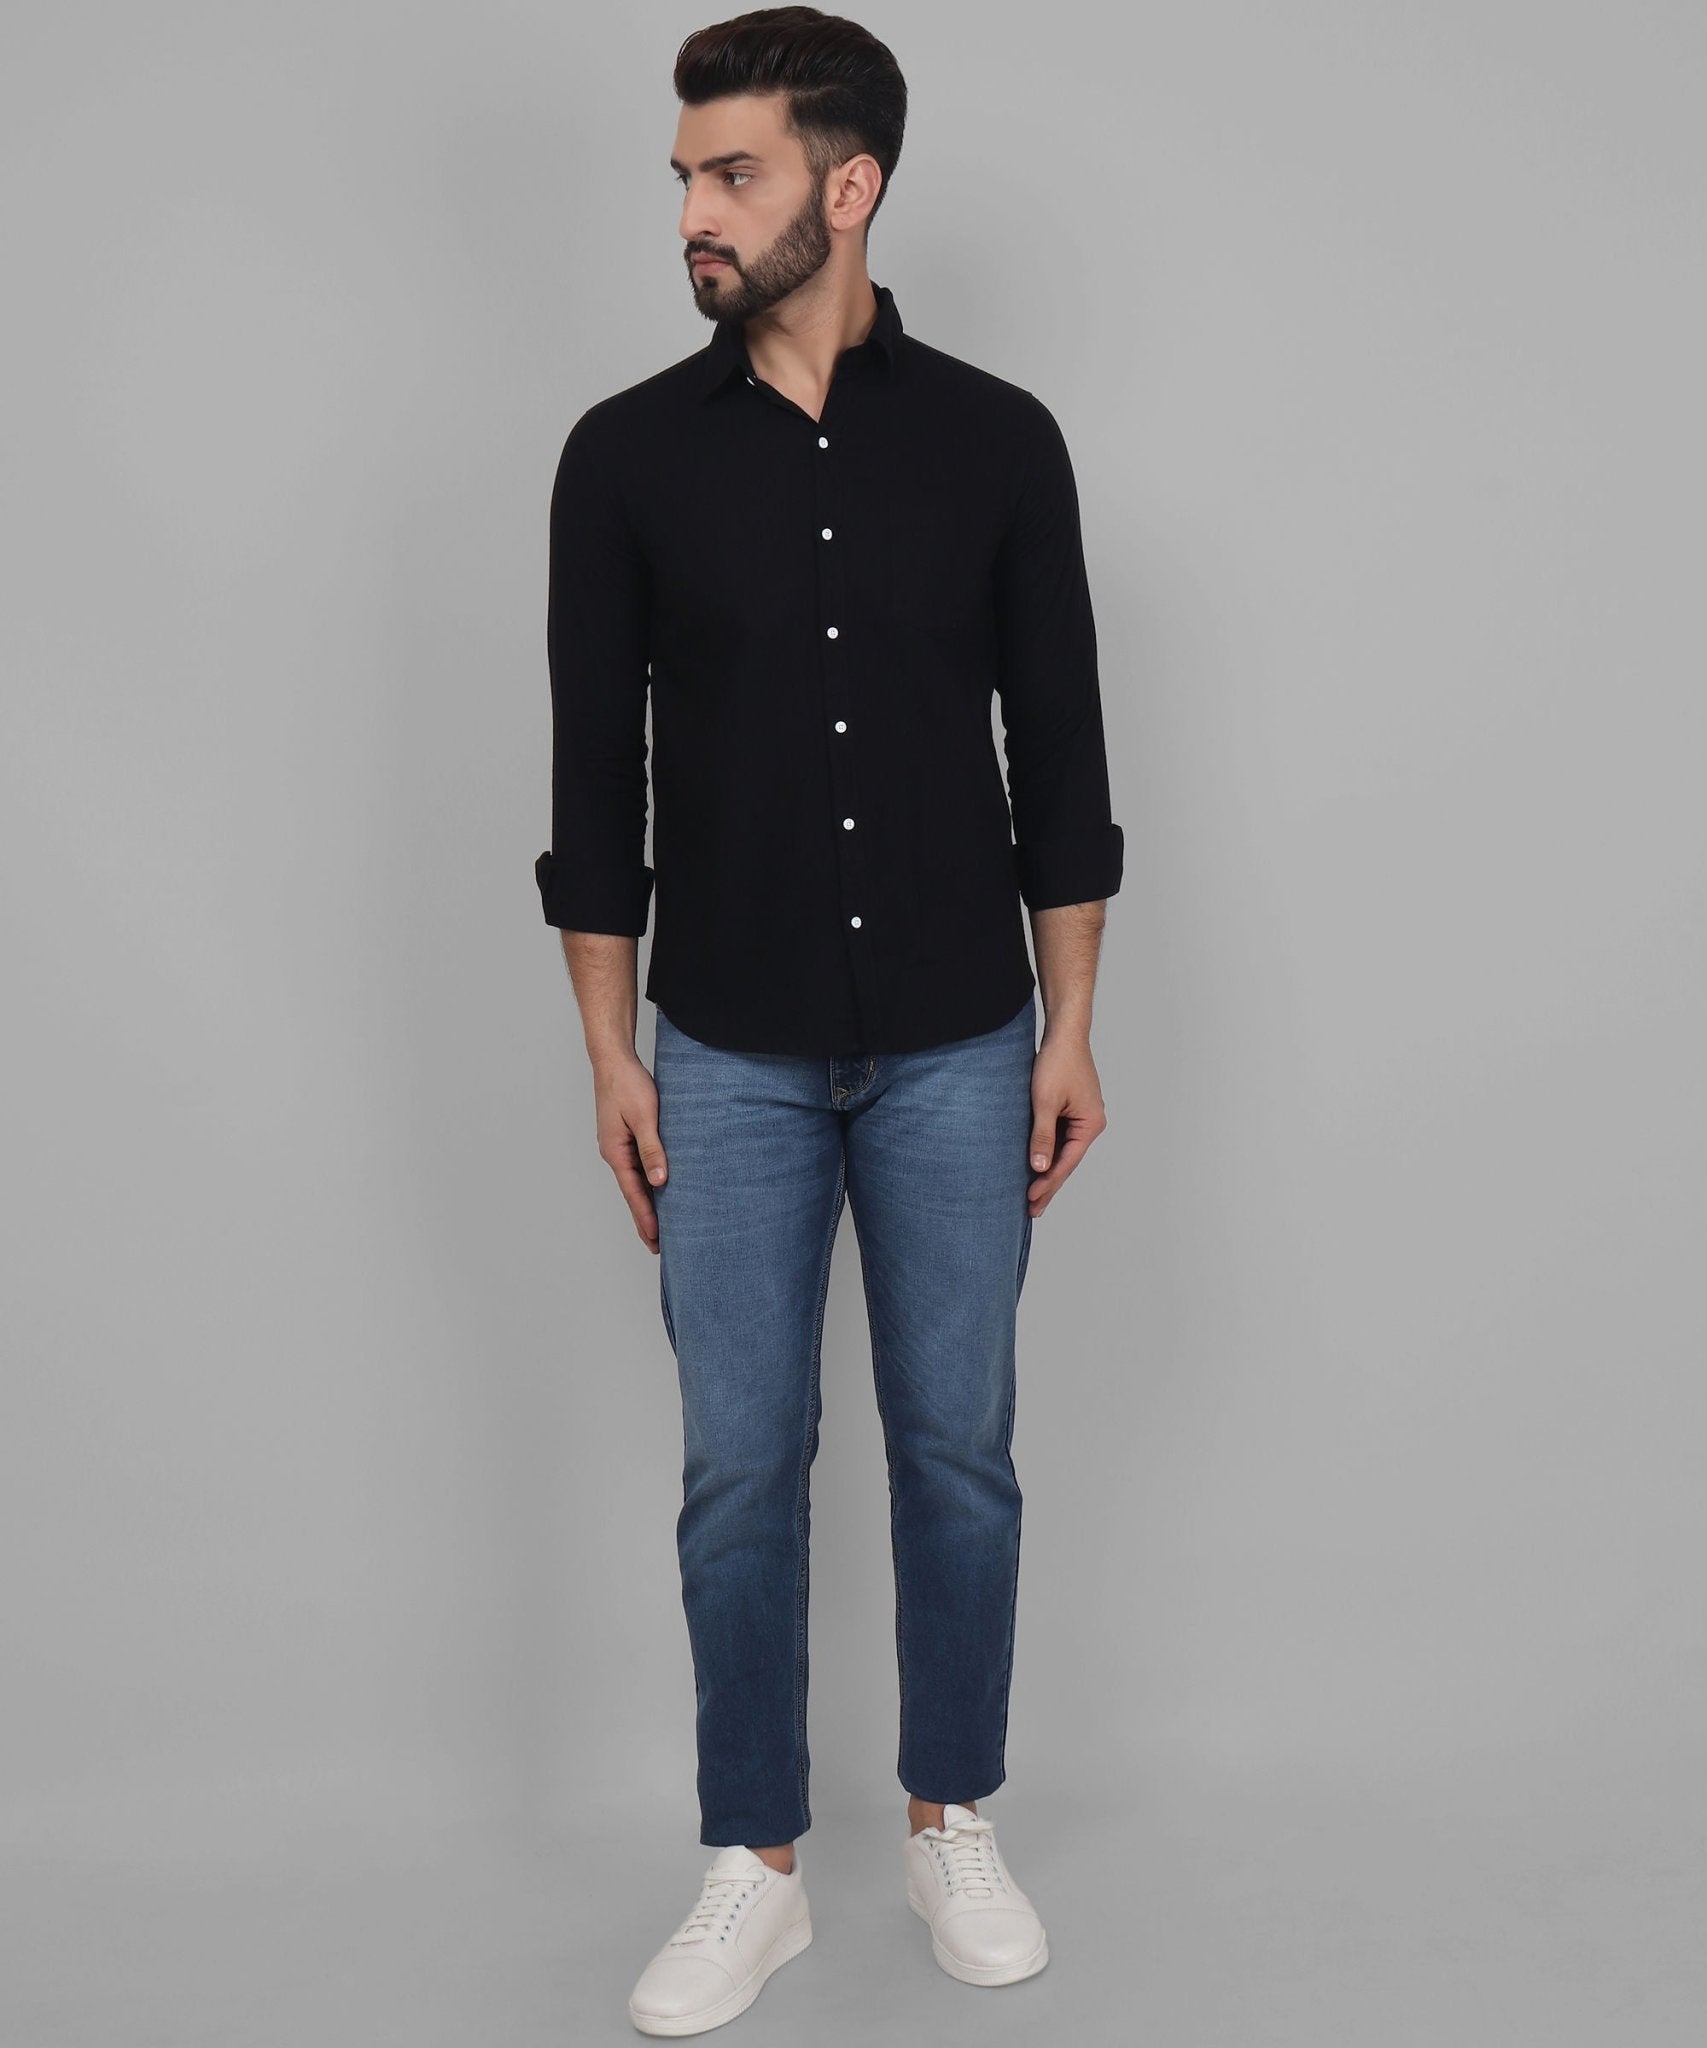 TryBuy Exclusive Fancy Button Down Black Linen Shirt for Men - TryBuy® USA🇺🇸